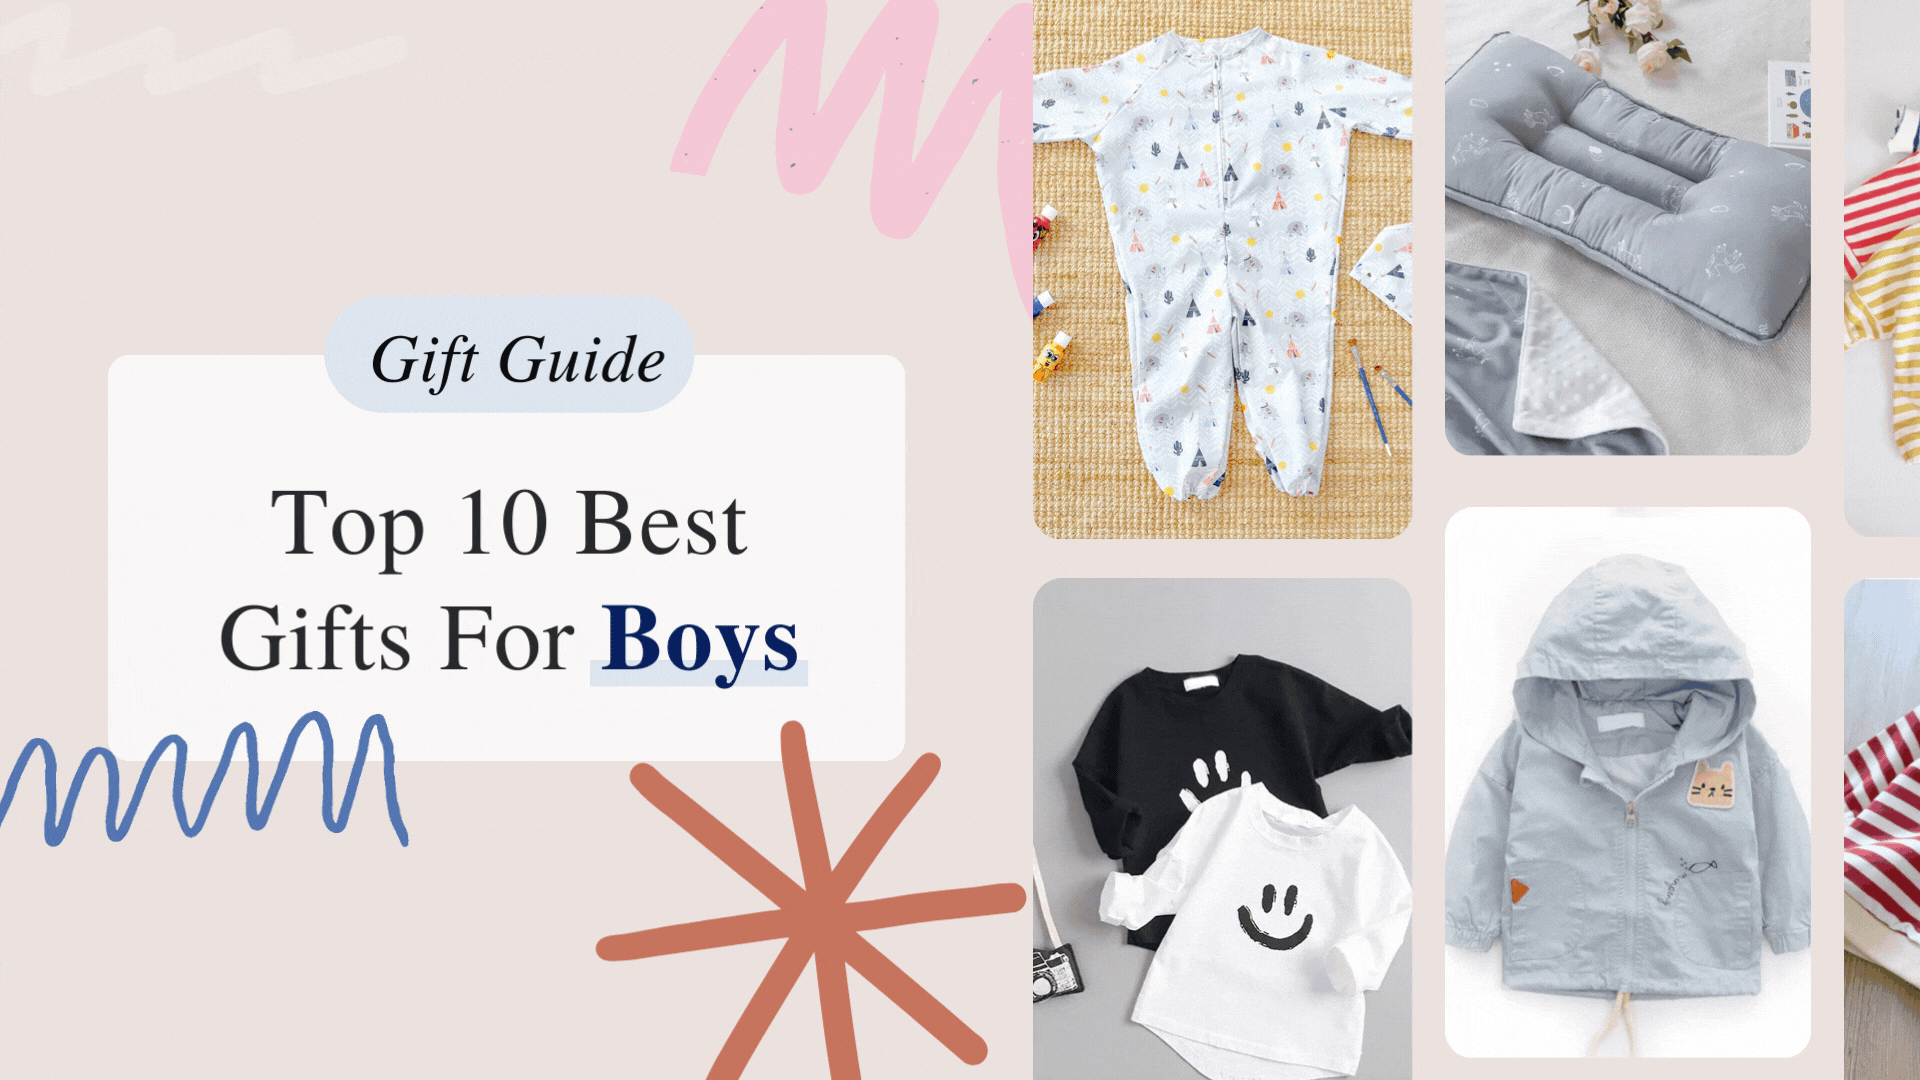 Gift Guide: Top 10 Best Gifts For Boys